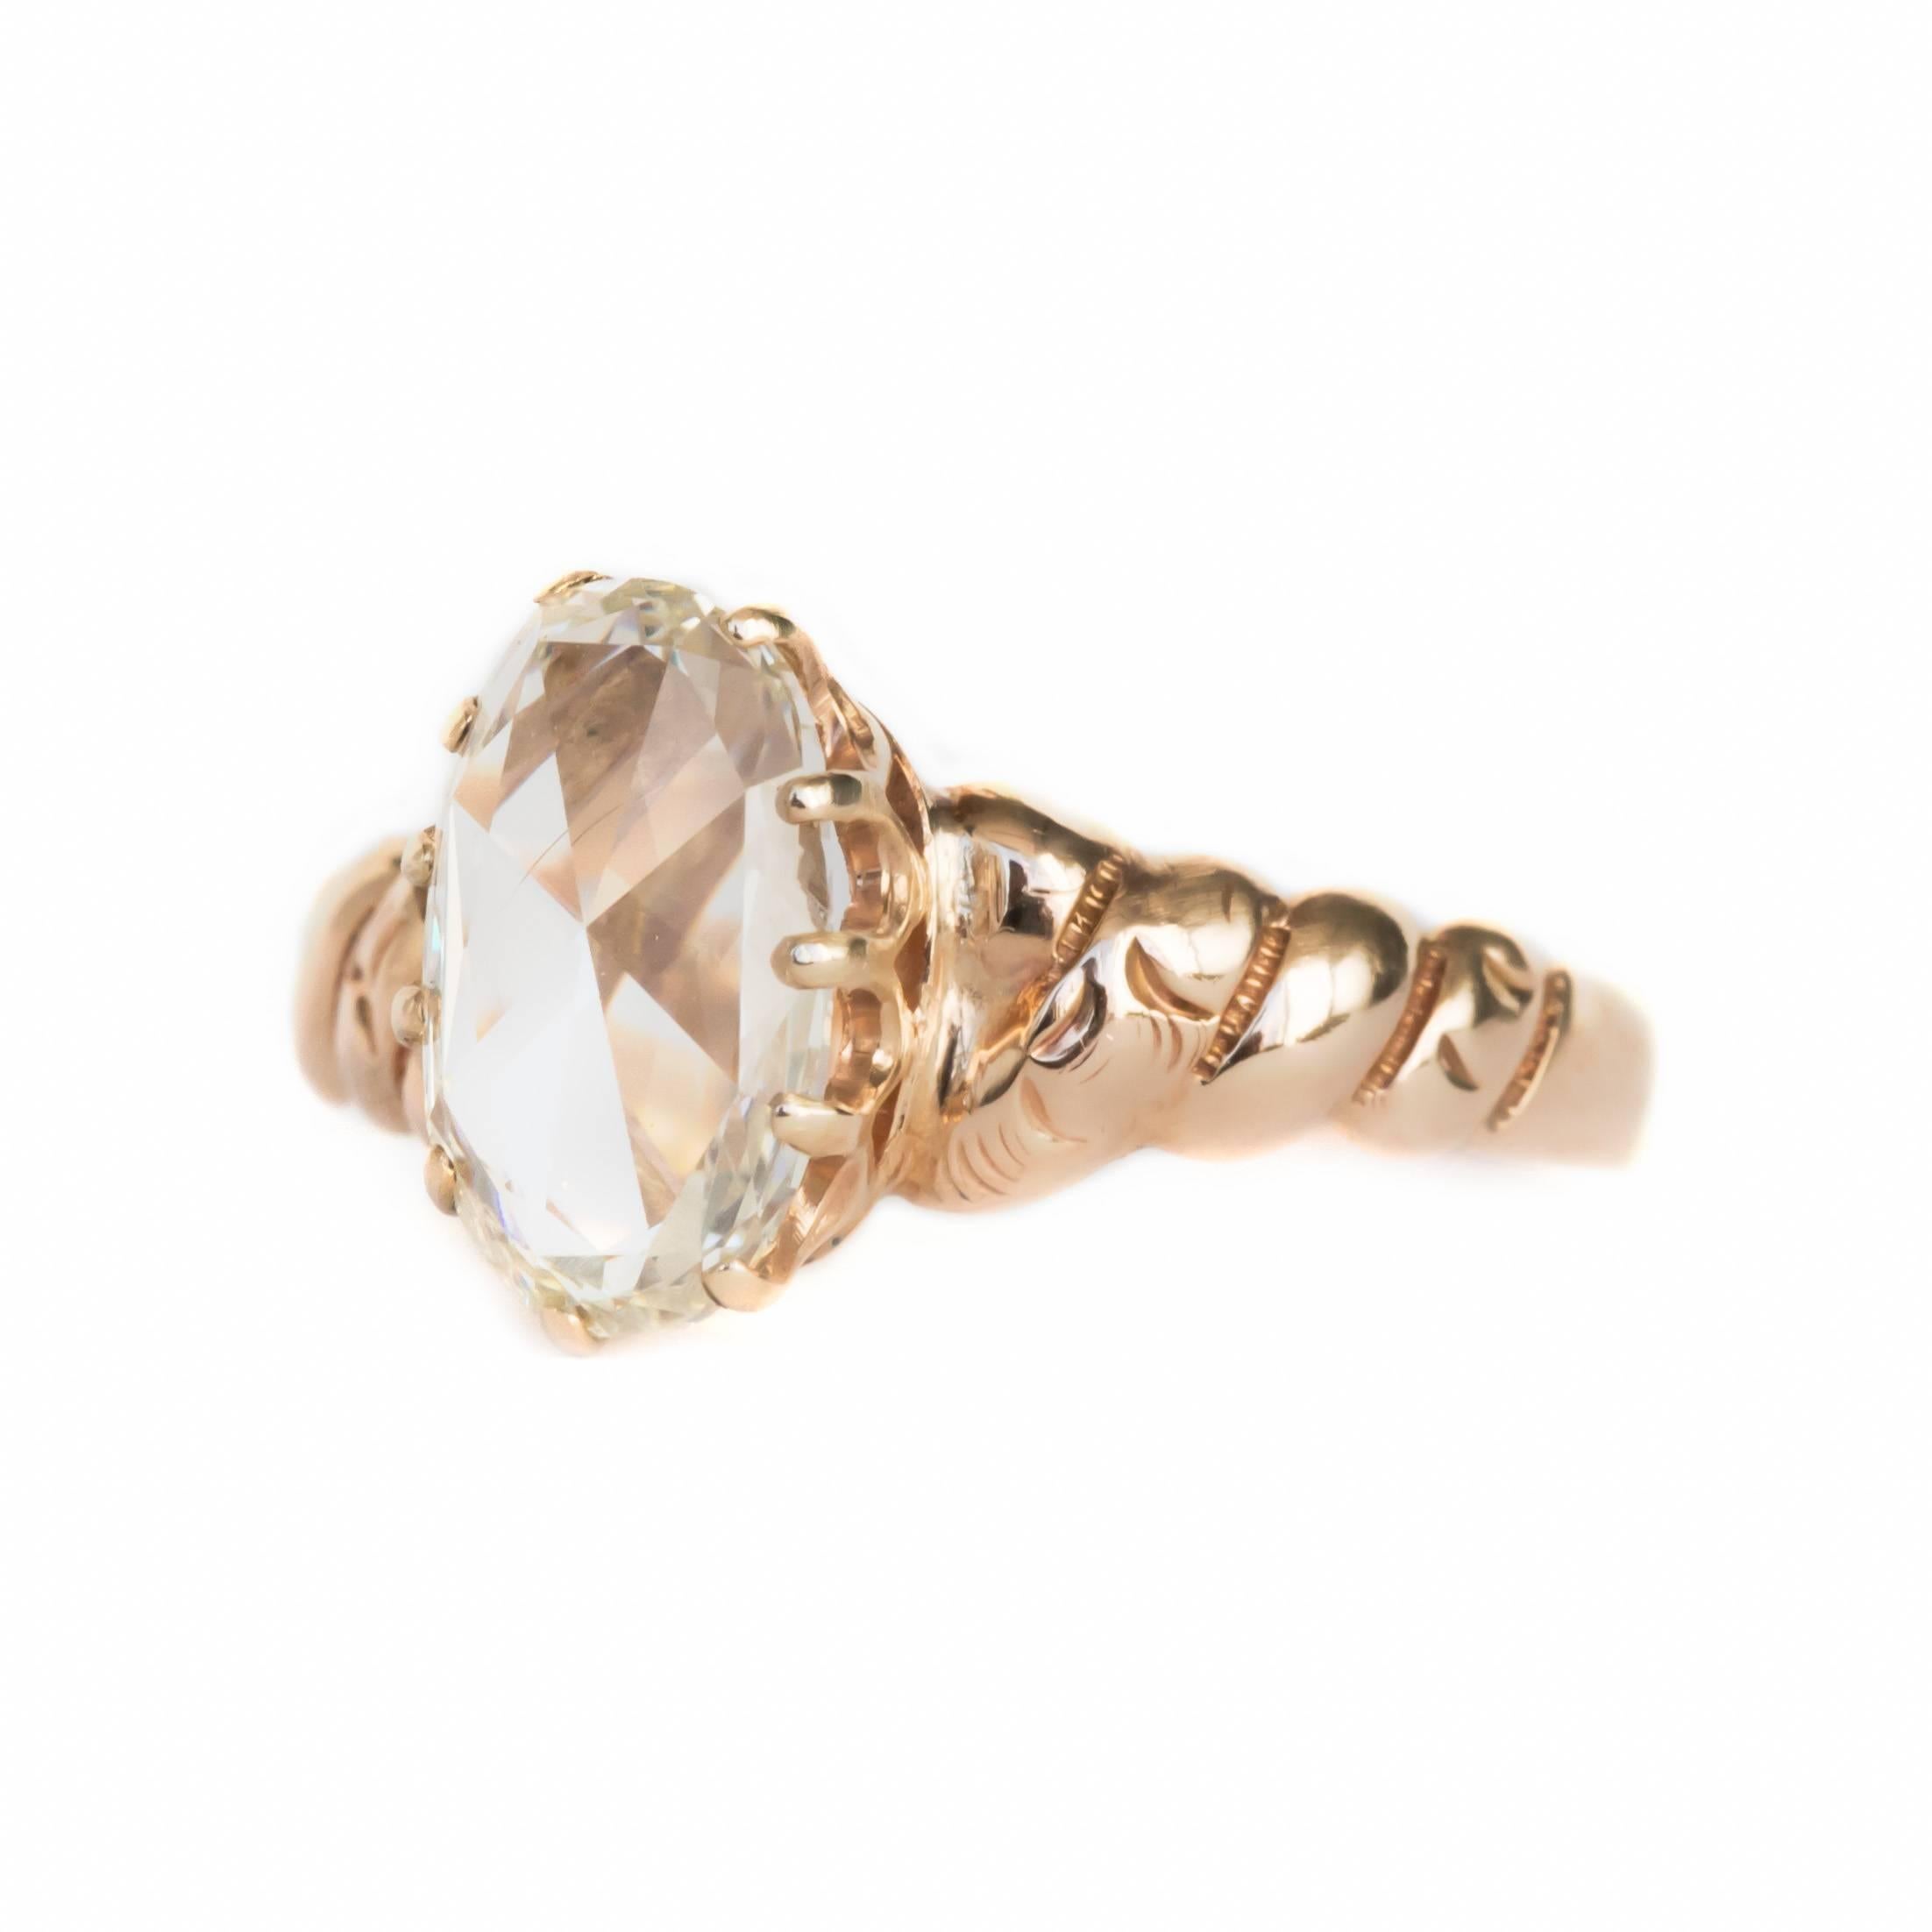 Item Details: 
Ring Size: Approximately 4.10
Metal Type: 9 Karat Yellow Gold
Weight: 1.4 grams

Center Diamond Details:
Shape: Oval Rose Cut
Carat Weight: 1.00 carat
Color: J
Clarity: VS2


Finger to Top of Stone Measurement: 4.42mm